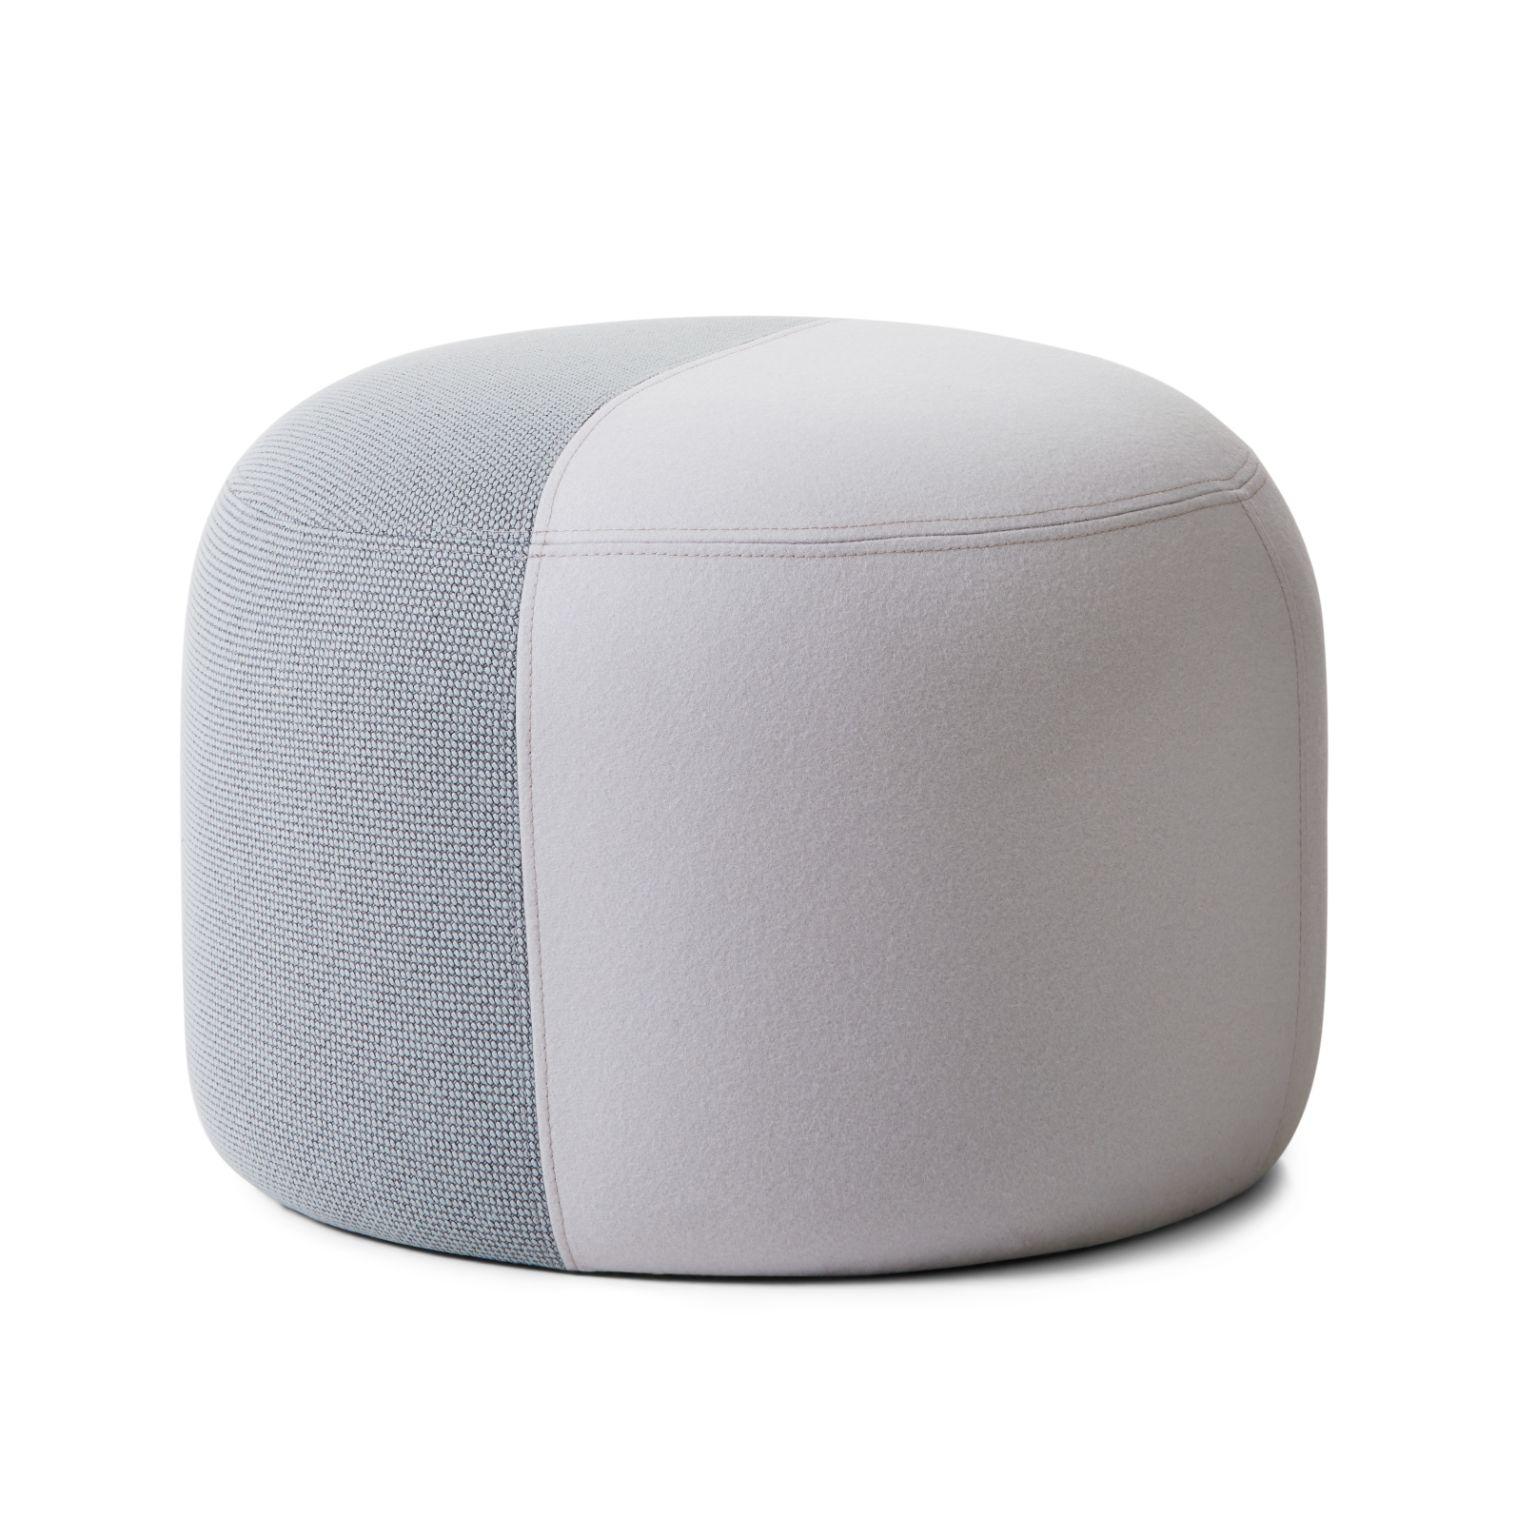 Dainty Pouf minty grey cloudy white by Warm Nordic
Dimensions: D 55 x H 39 cm
Material: Textile upholstery, Wooden frame, foam.
Weight: 9.5 kg
Also available in different colours and finishes.

Sophisticated, two-coloured pouf with soft shapes